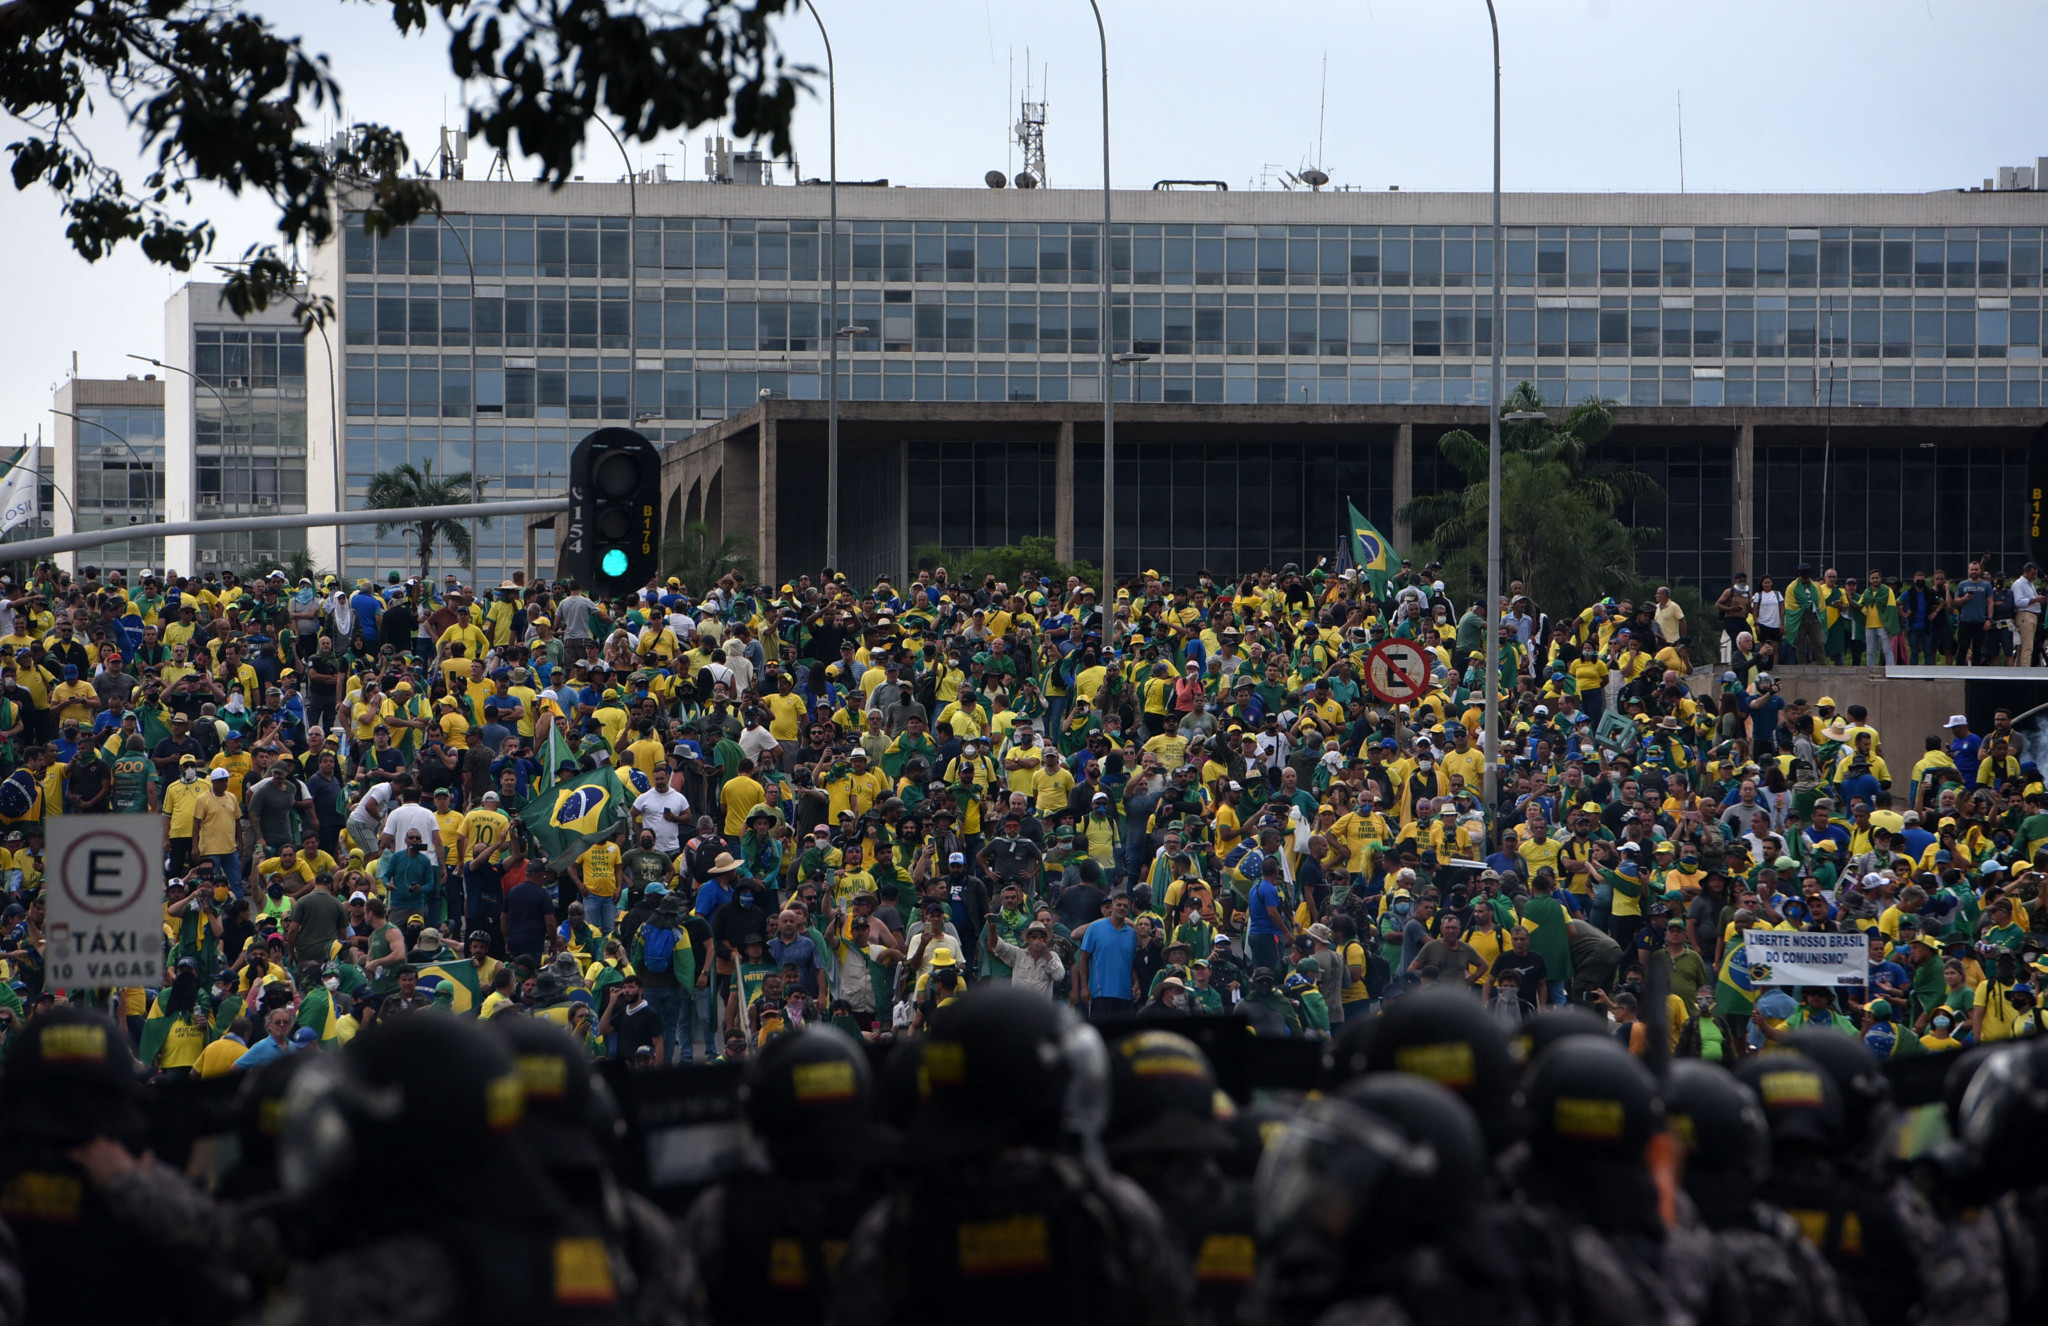 The CBF has condemned the actions of rioters, who wore the national football jersey during the chaotic protests in Brasília ©Getty Images